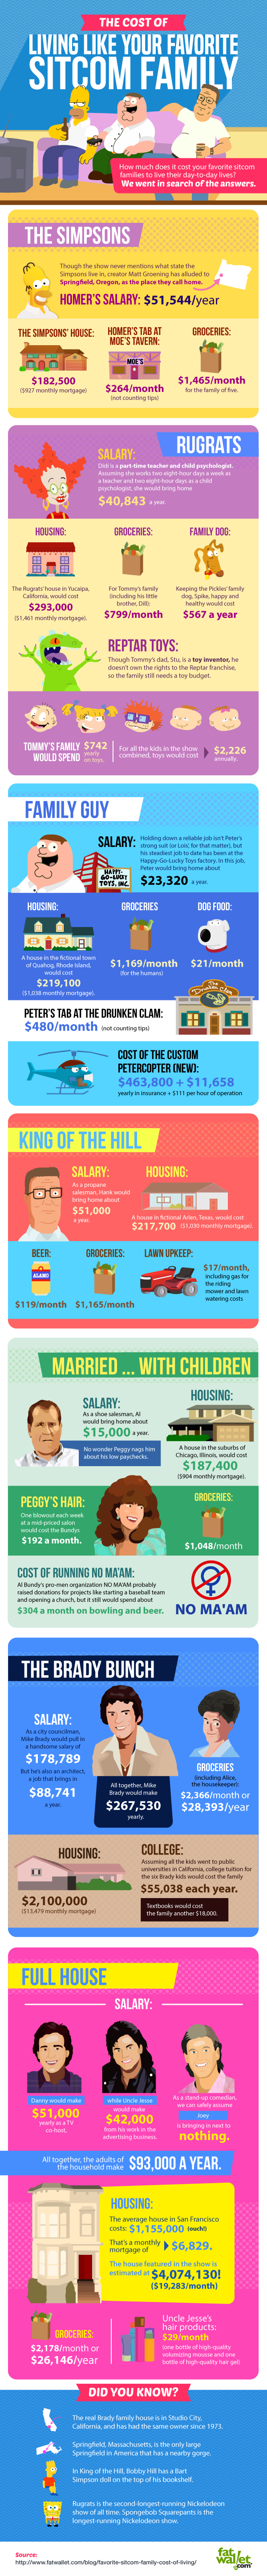 The Cost of Living Like Your Favorite Sitcom Family